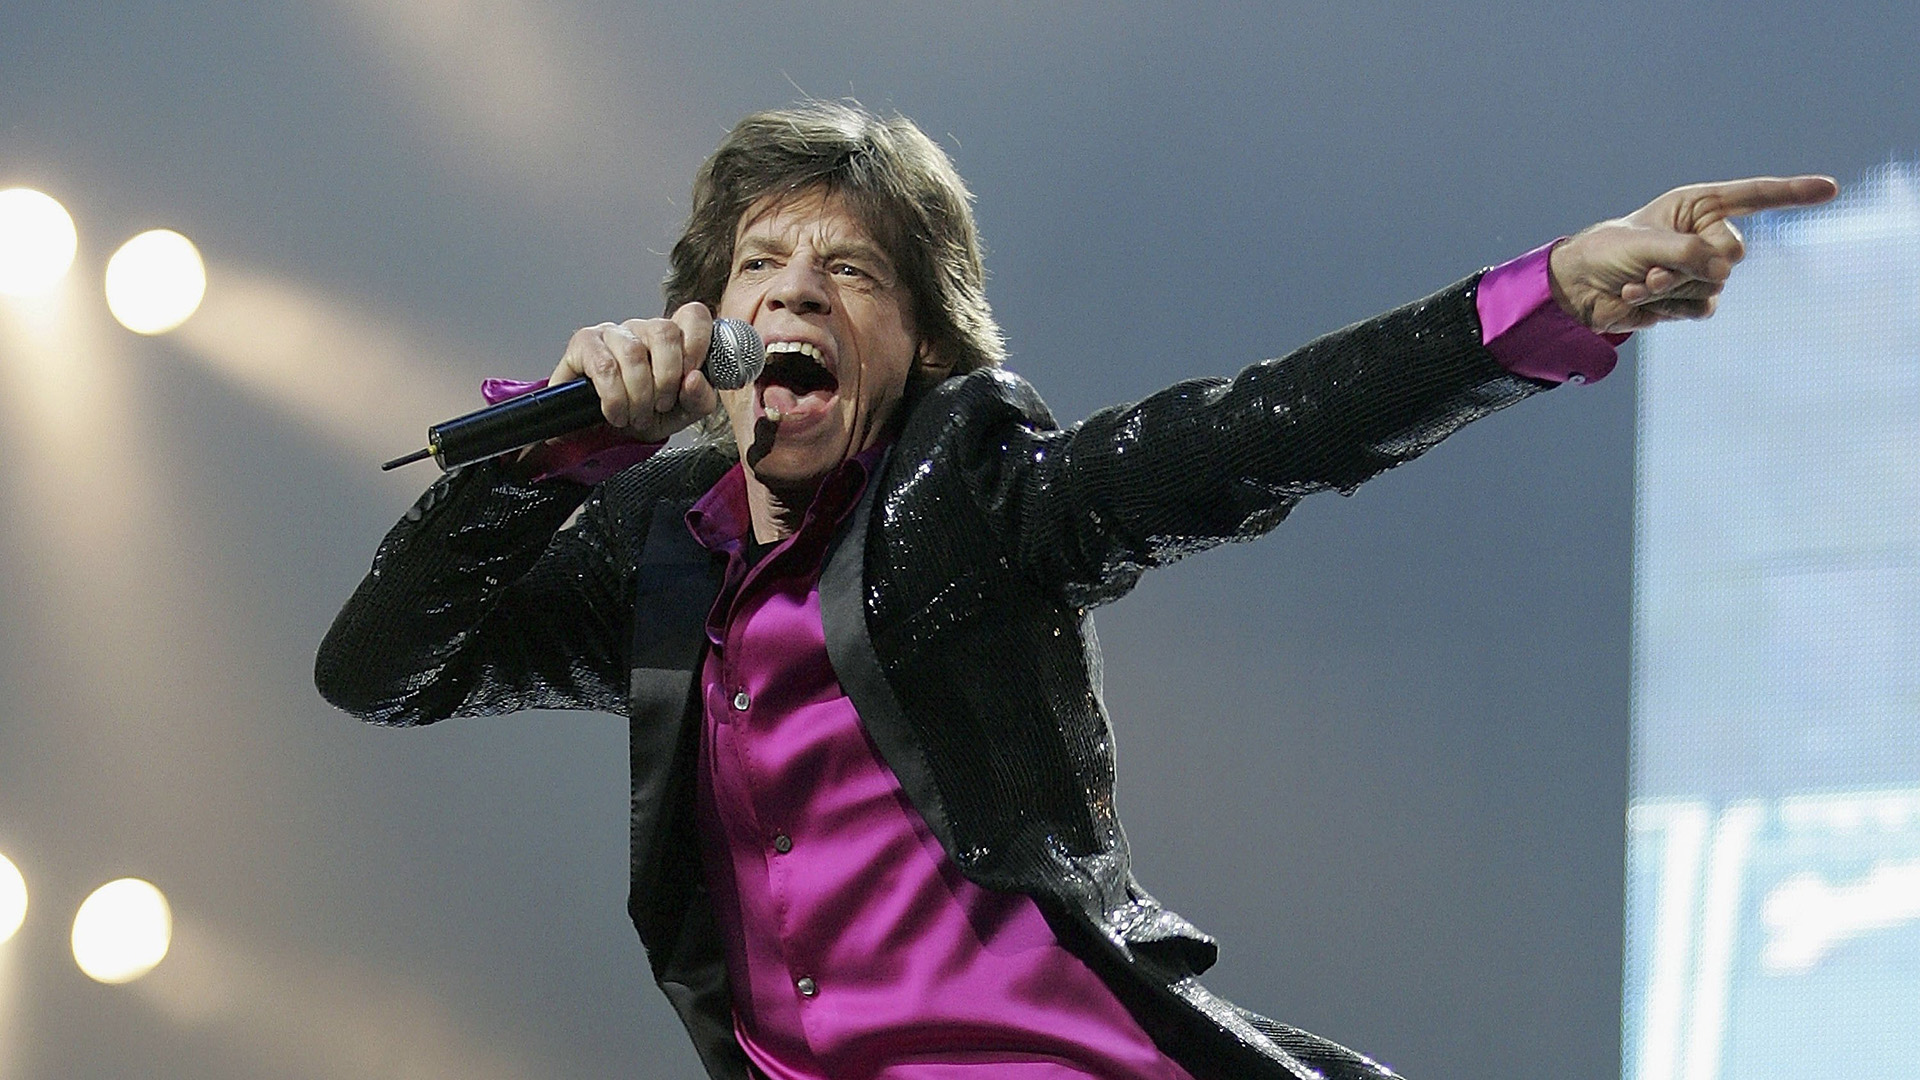 Mick Jagger of The Rolling Stones performs during a concert at Saitama Super Arena on April 2, 2006 in Saitama, Japan. The Rolling Stones are in Japan to play in 5 cities around the country as part of their Bigger Bang world tour.